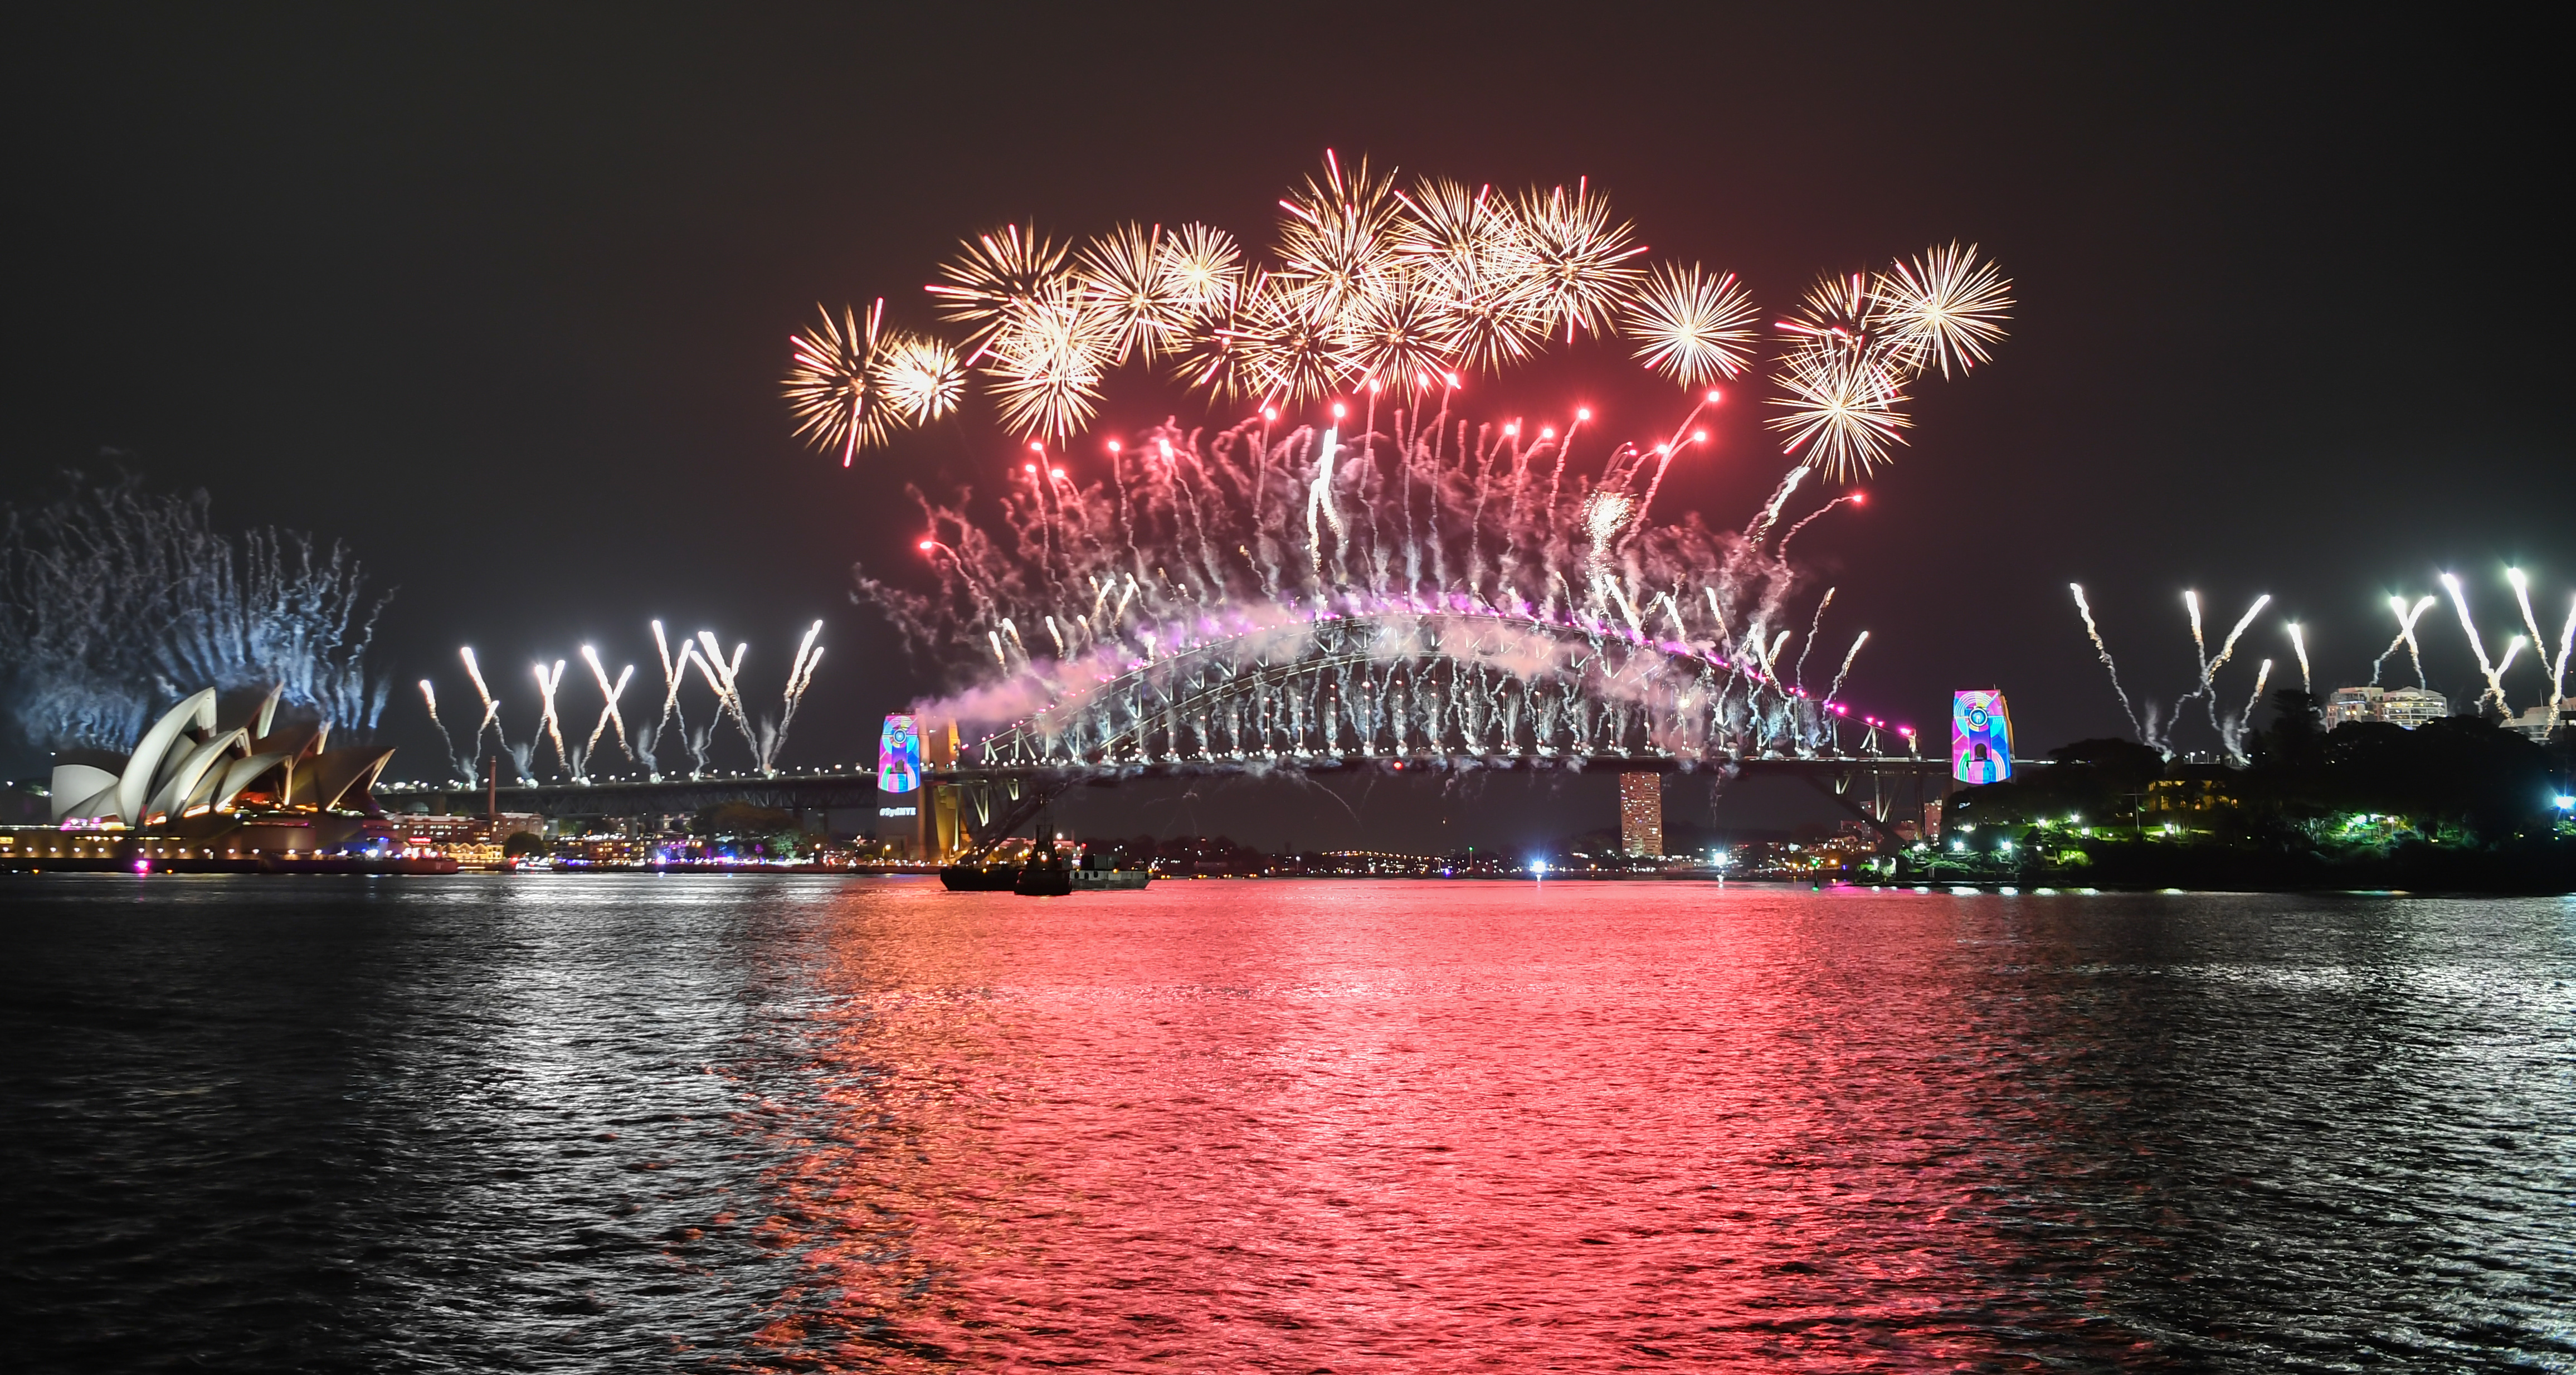 The Sydney Harbour Bridge is bathed in fireworks and lighting effects during New Year